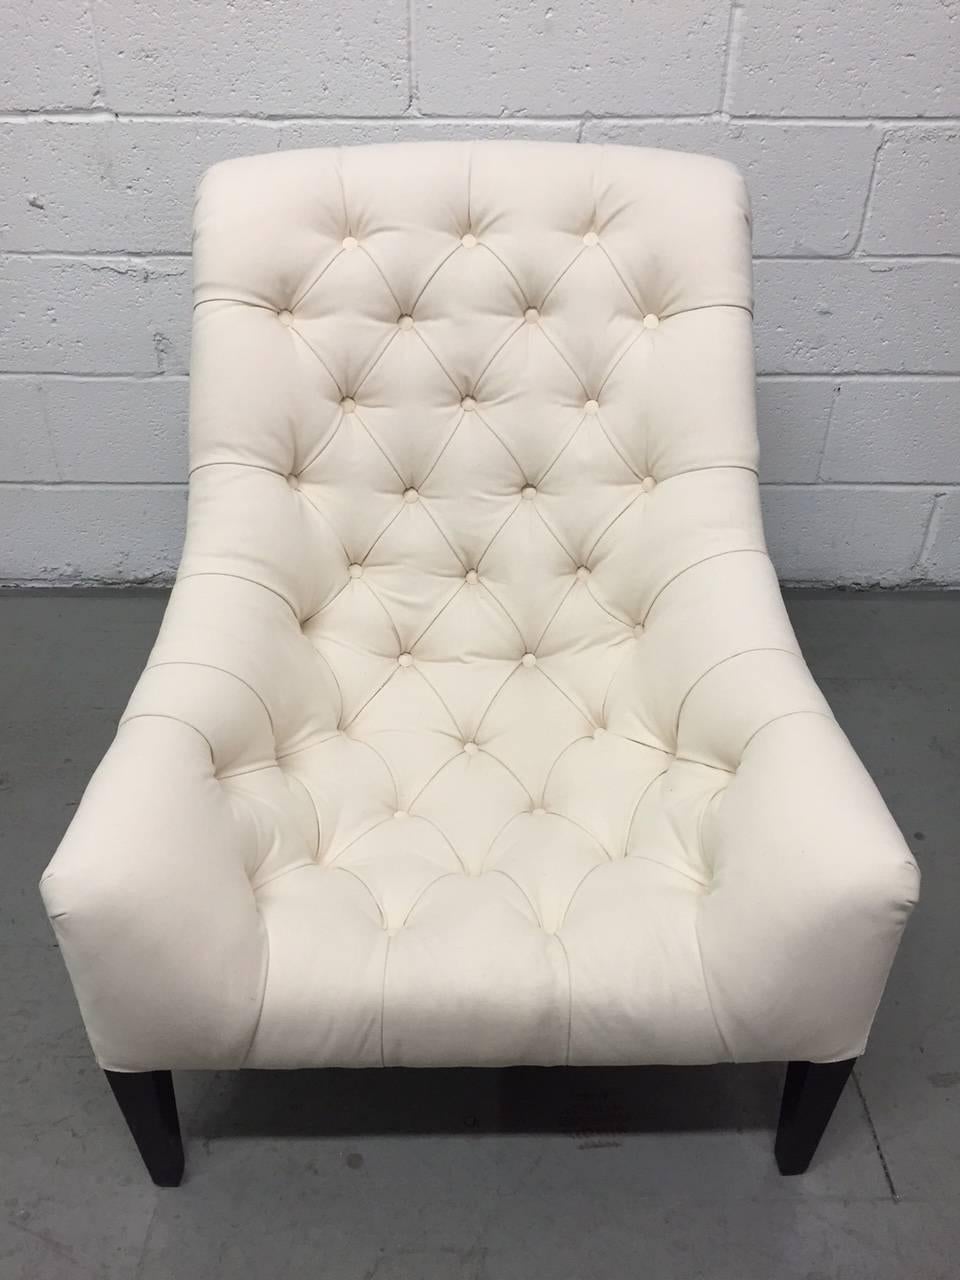 Pair of English Tufted Edwardian Style Lounge Chairs In Good Condition For Sale In New York, NY